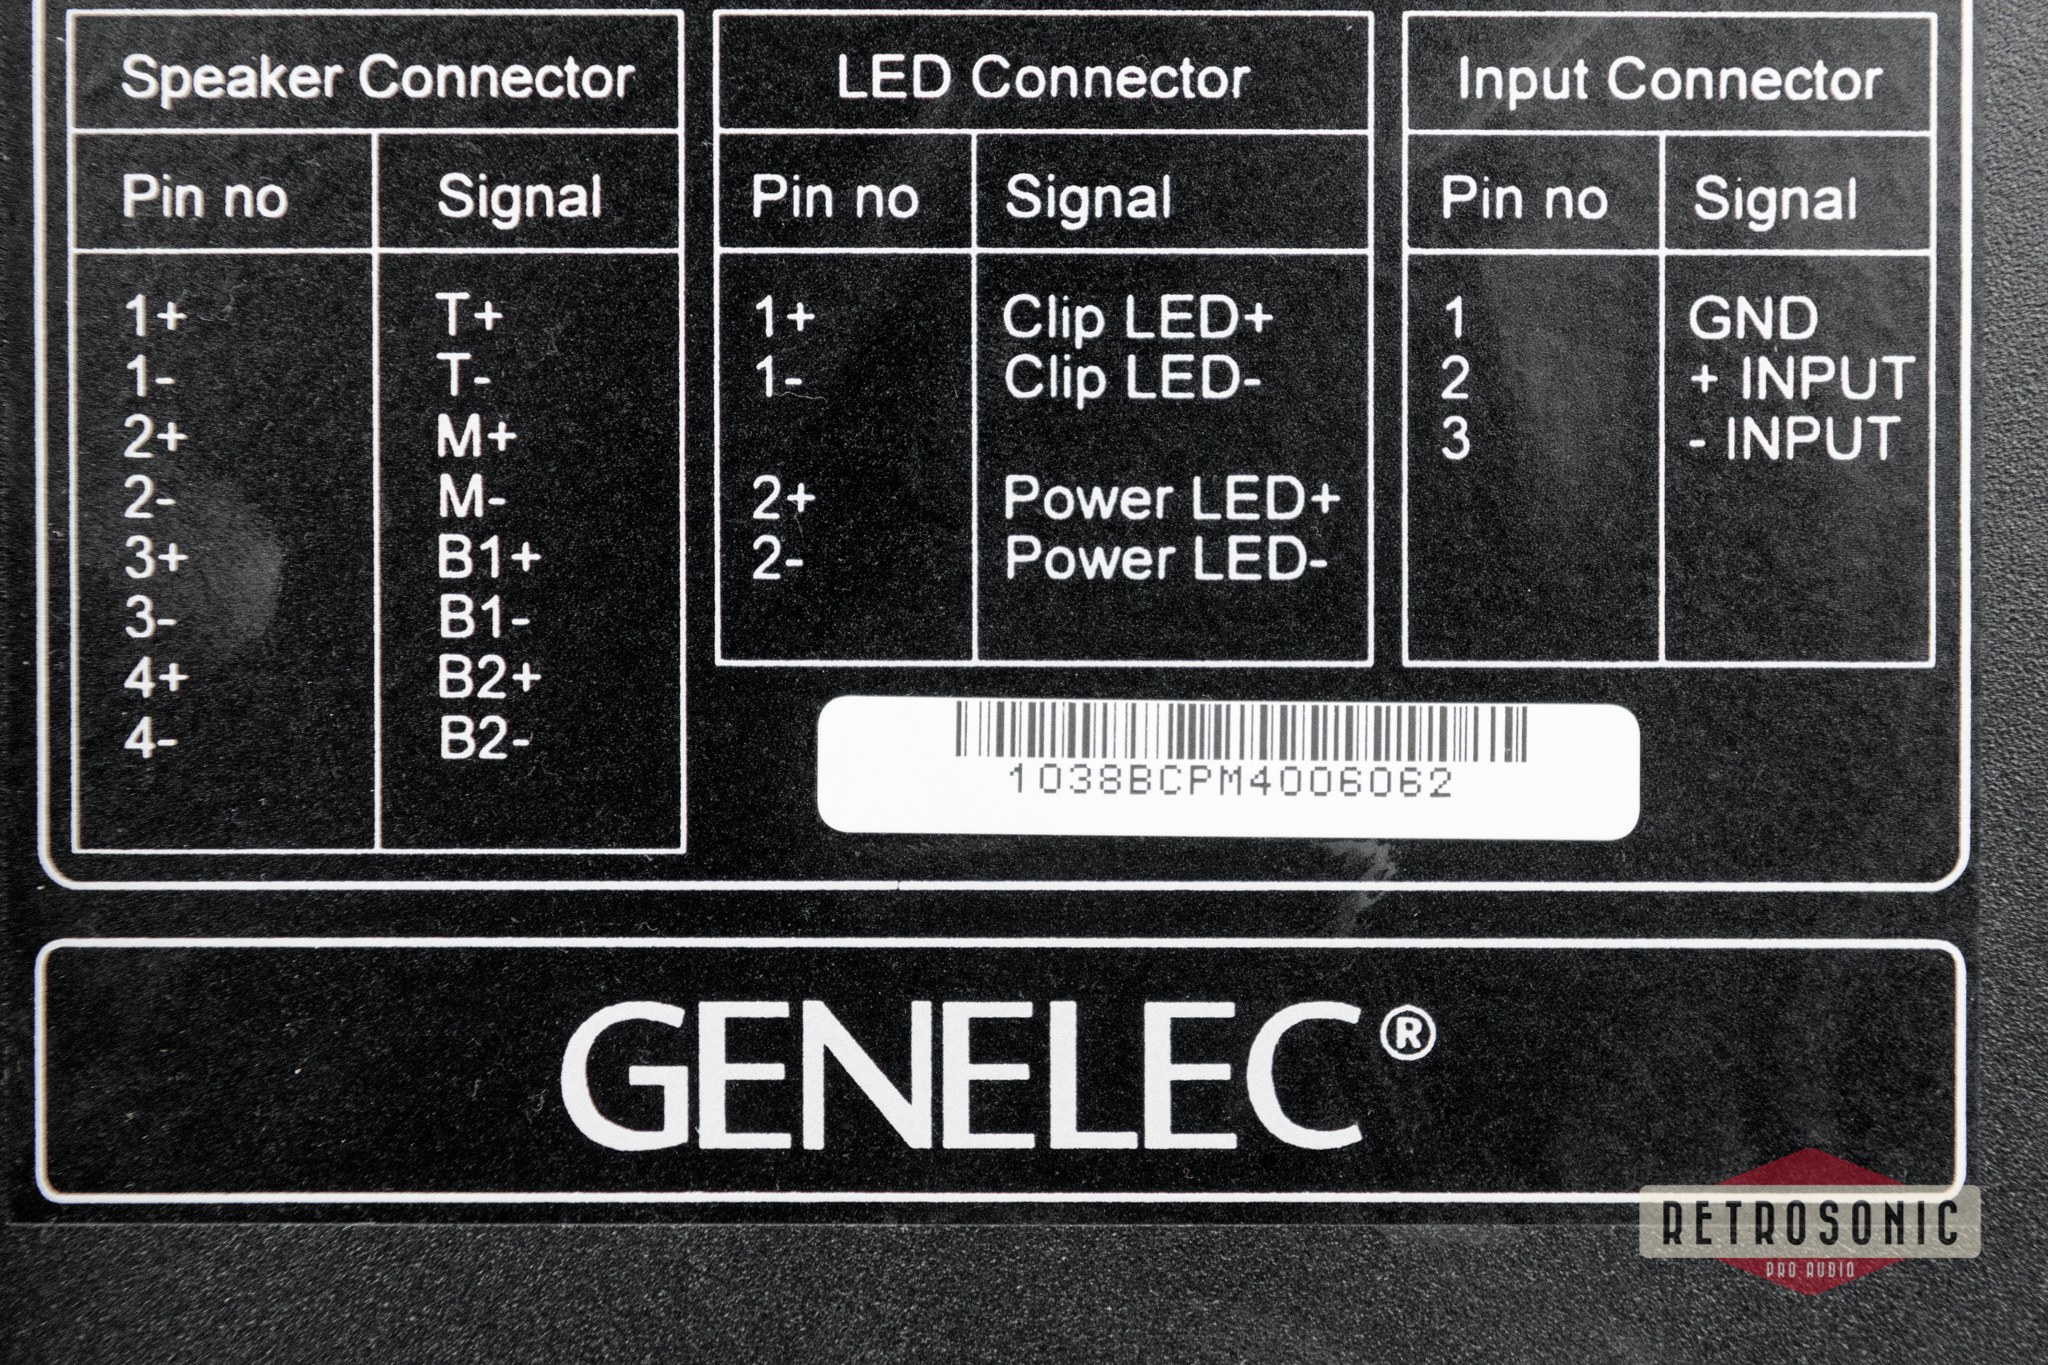 Genelec 1038BC Tri-amplified Active Monitoring System single unit #2